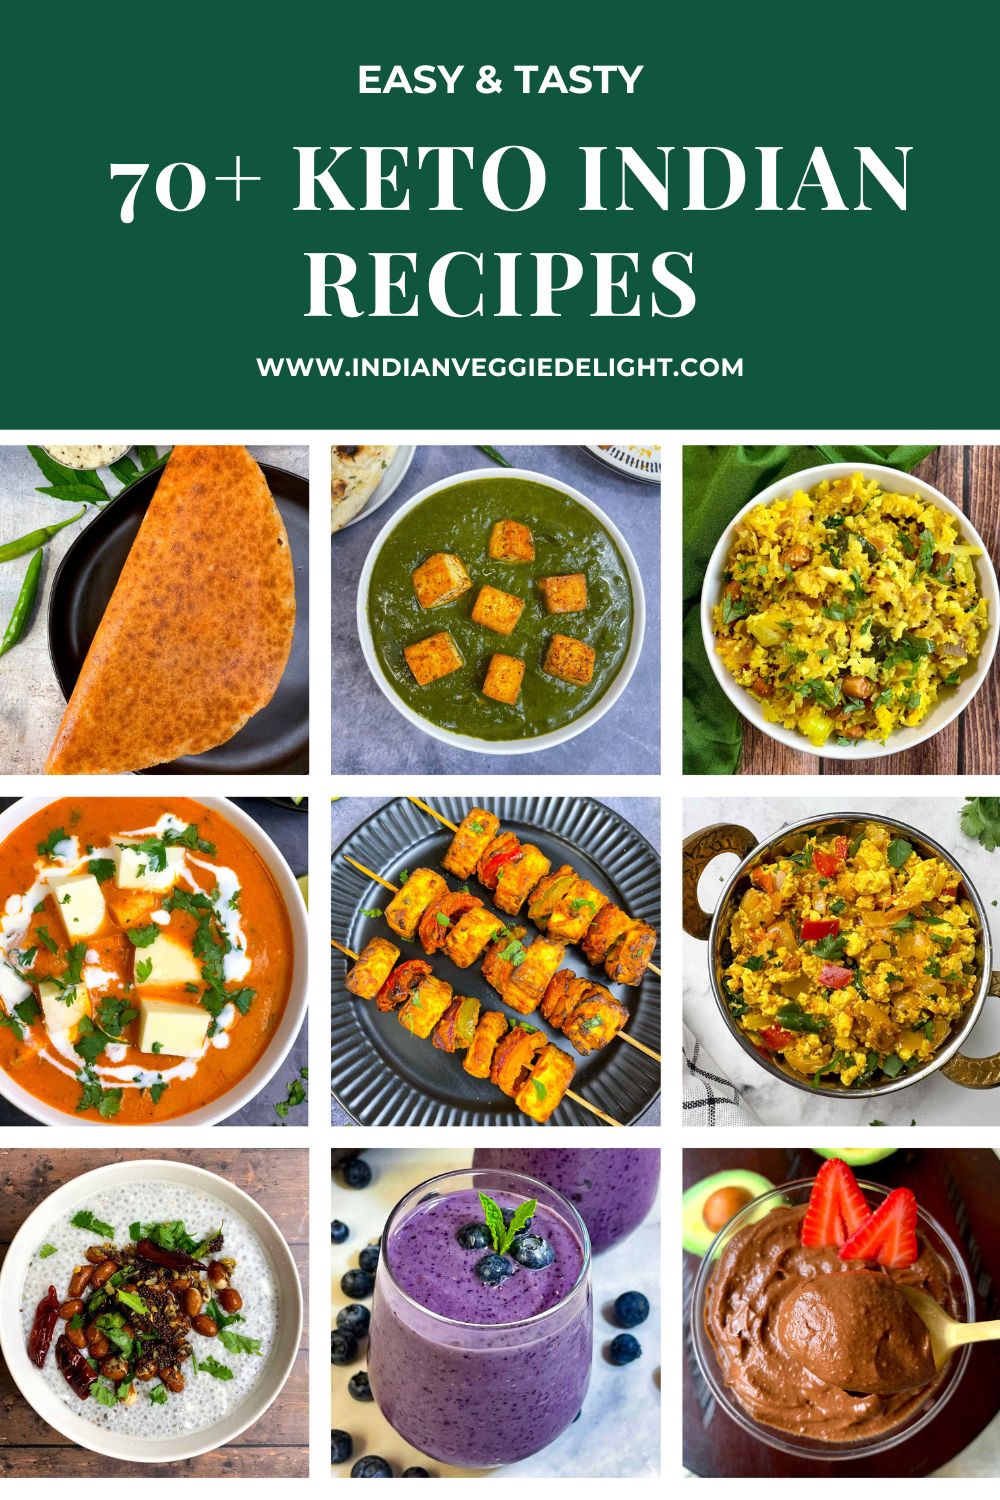 70+ keto indian food recipes collage